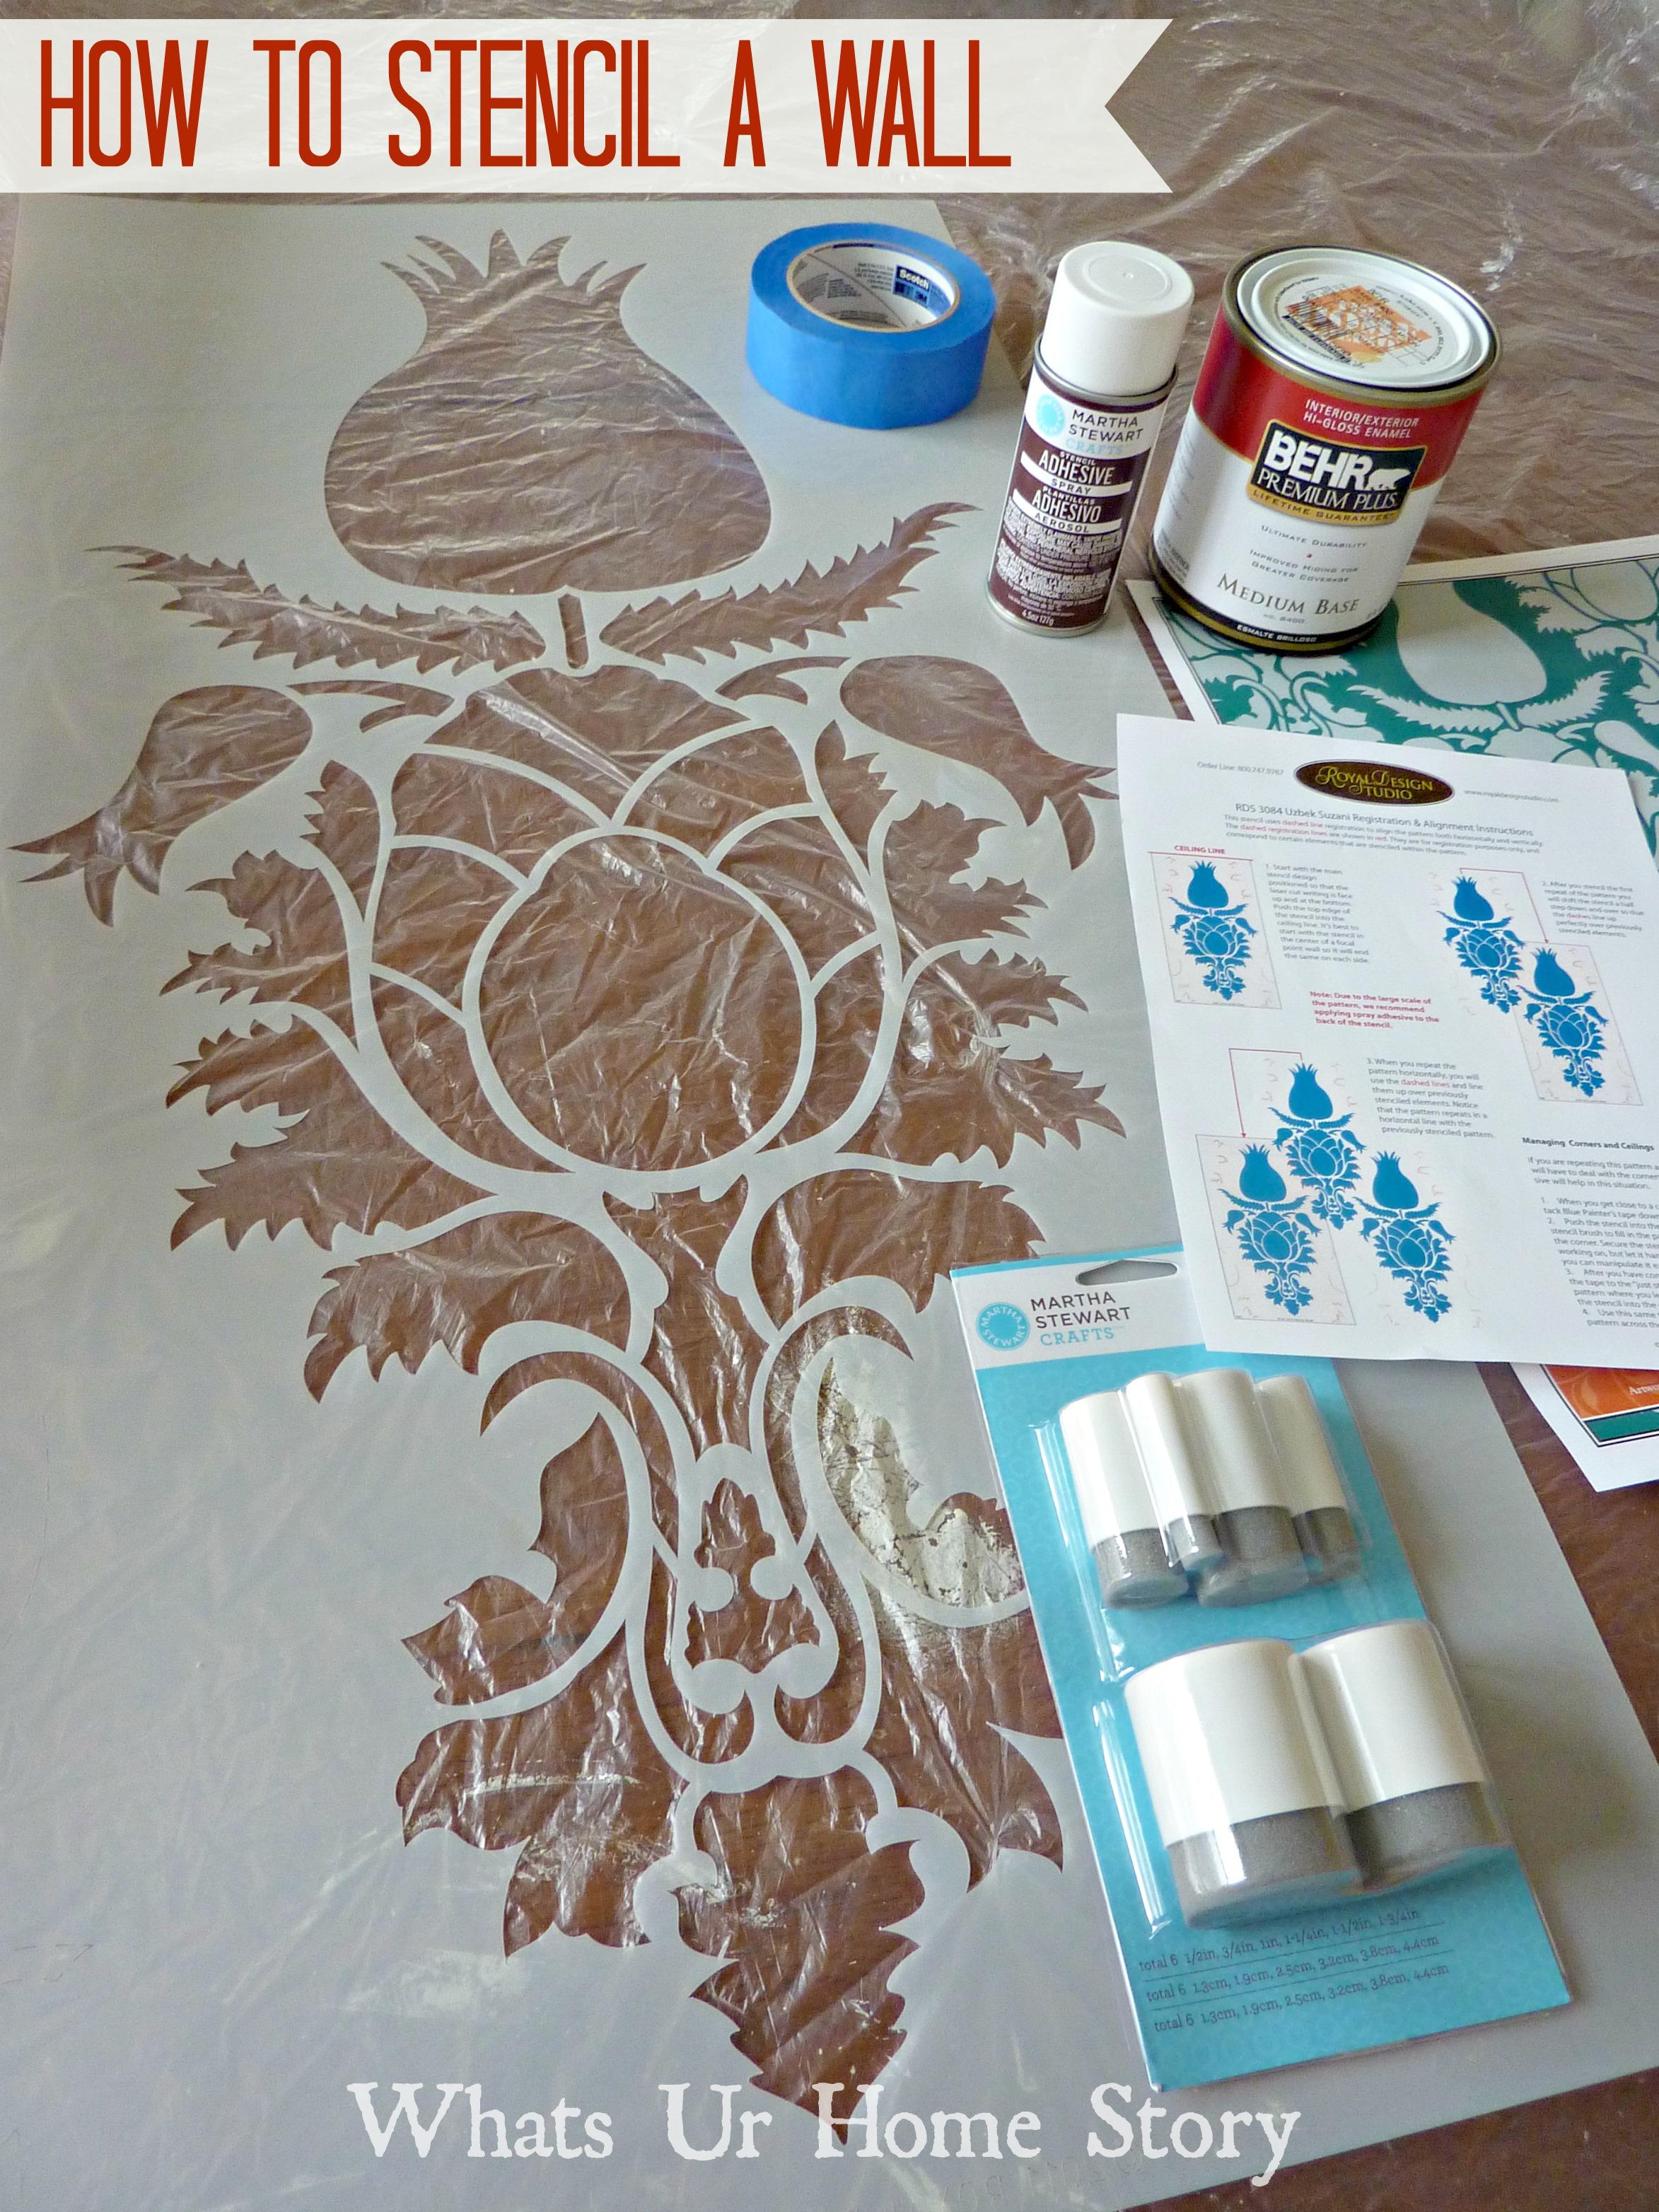 Stencil Paint Or Wallpaper: Which One Should You Choose?